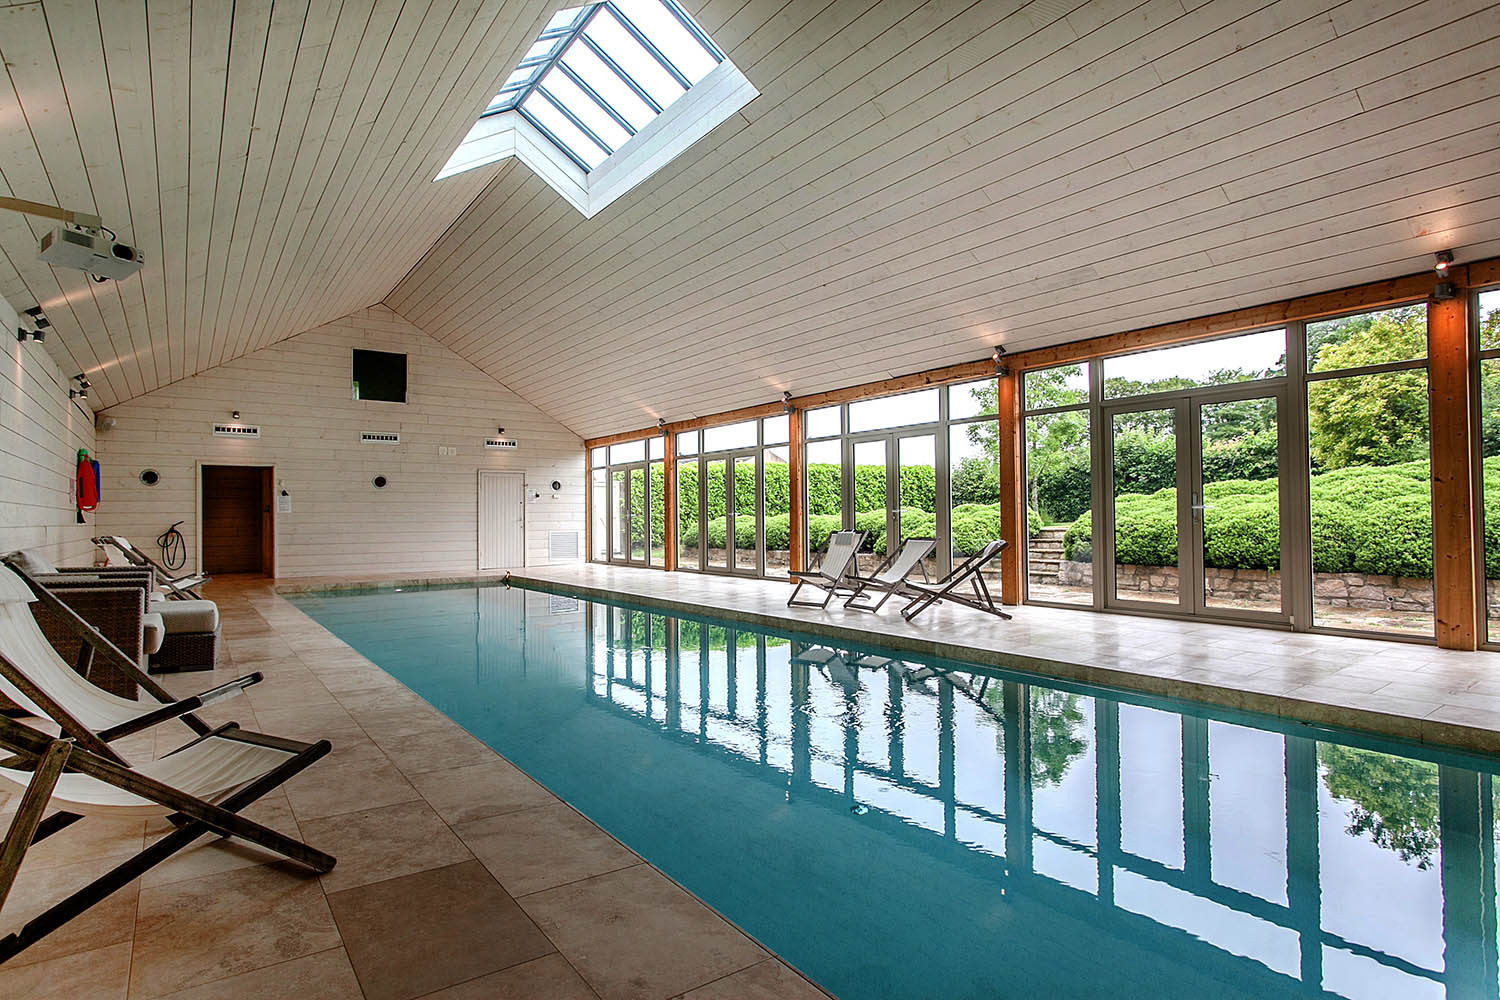 The swimming pool at Lilycombe Farm